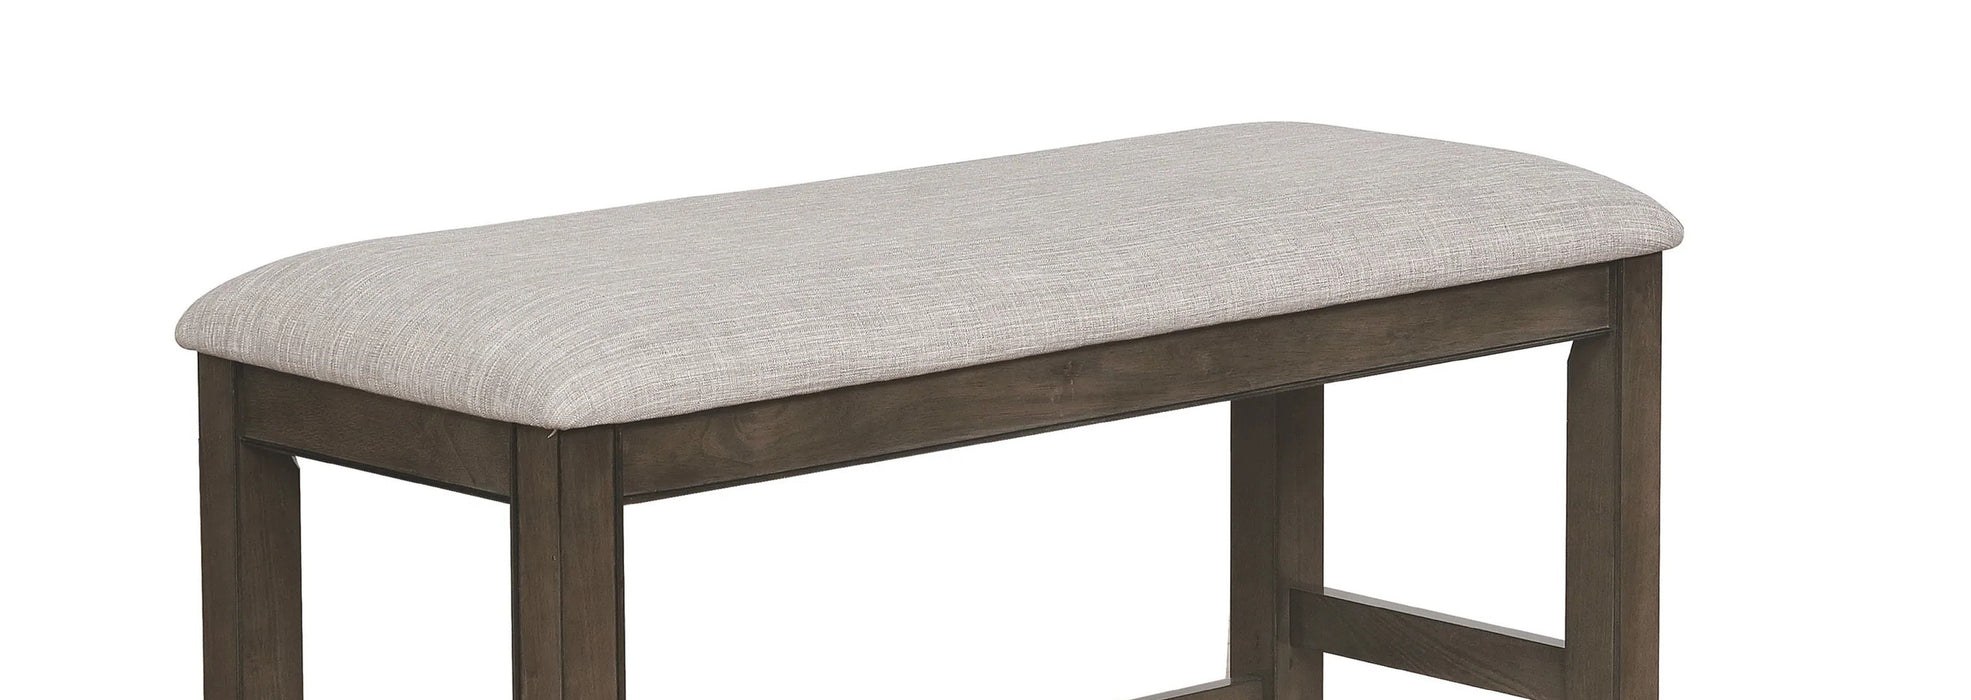 Farmhouse Style 1 Piece Gray Counter Height Bench Footrest Upholstered Seat Wooden Furniture